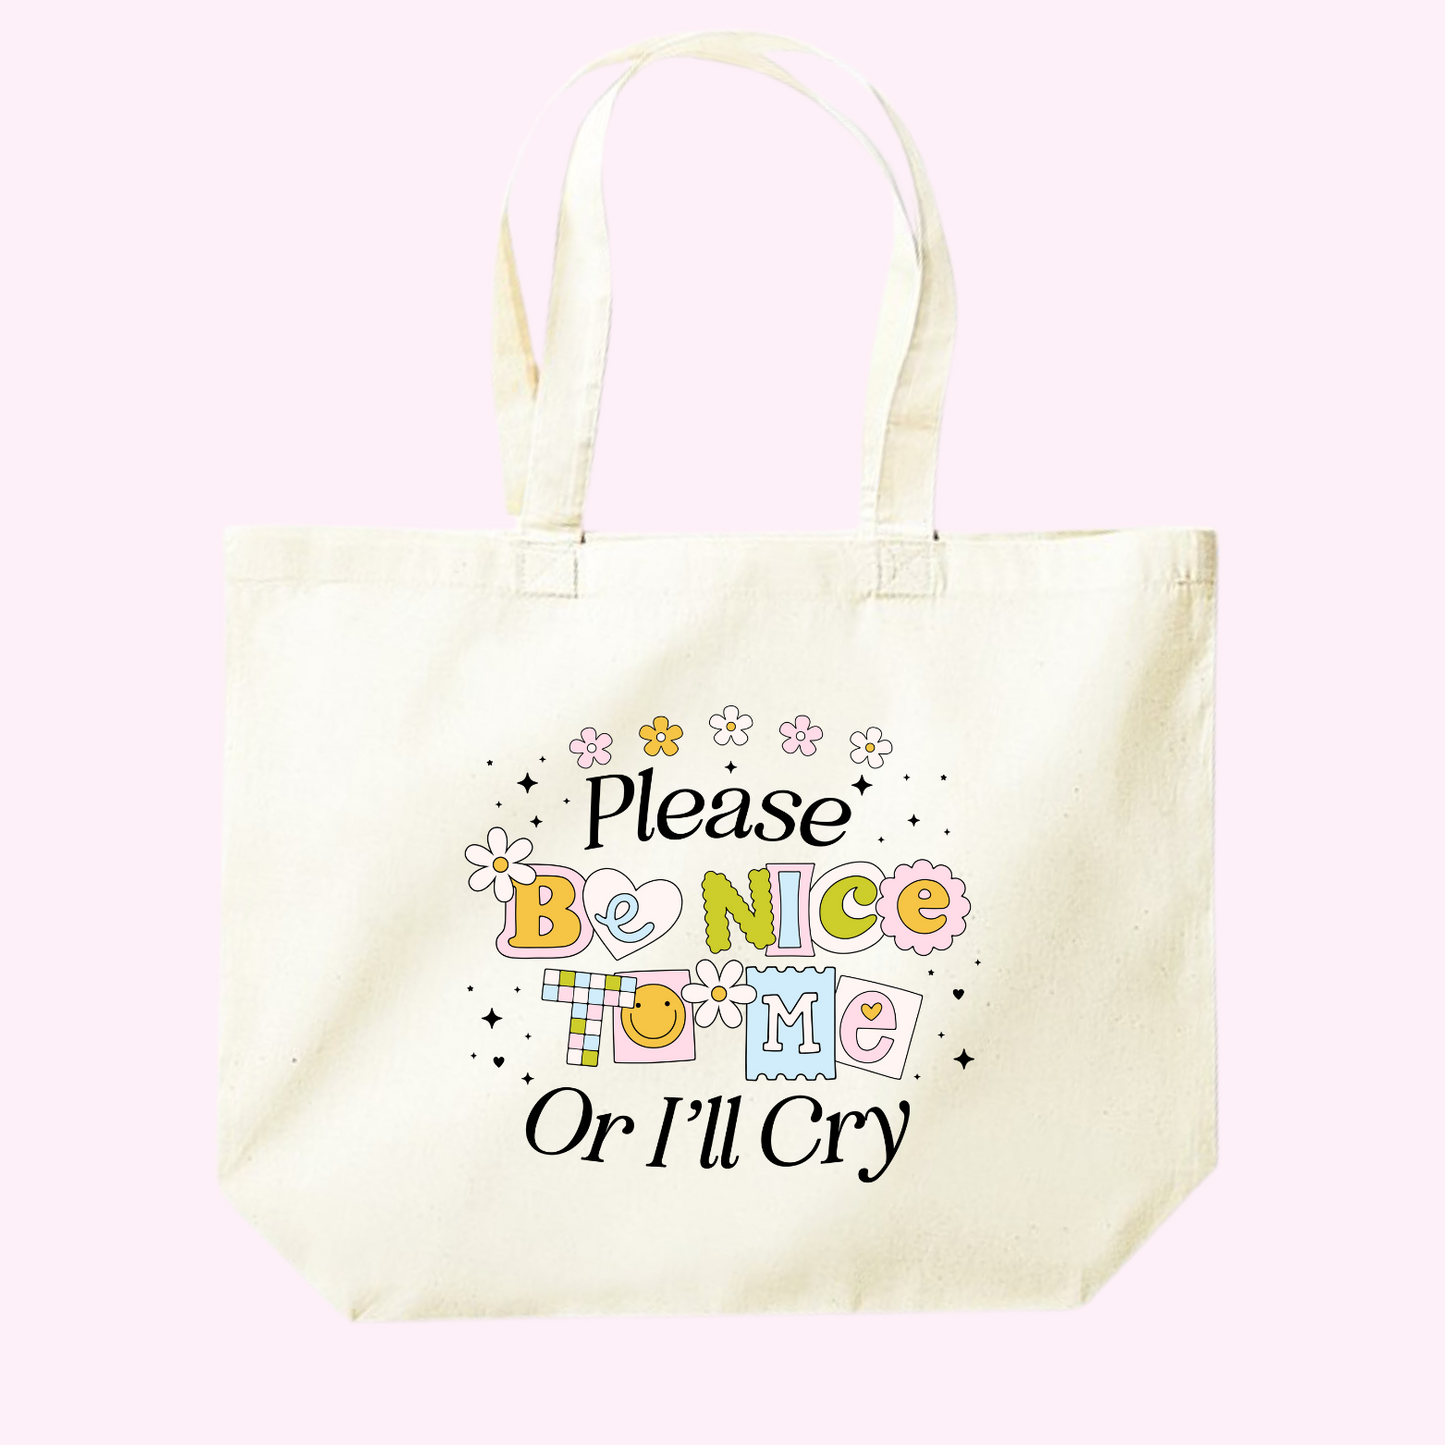 PLEASE BE NICE TO ME SHOPPER TOTE BAG